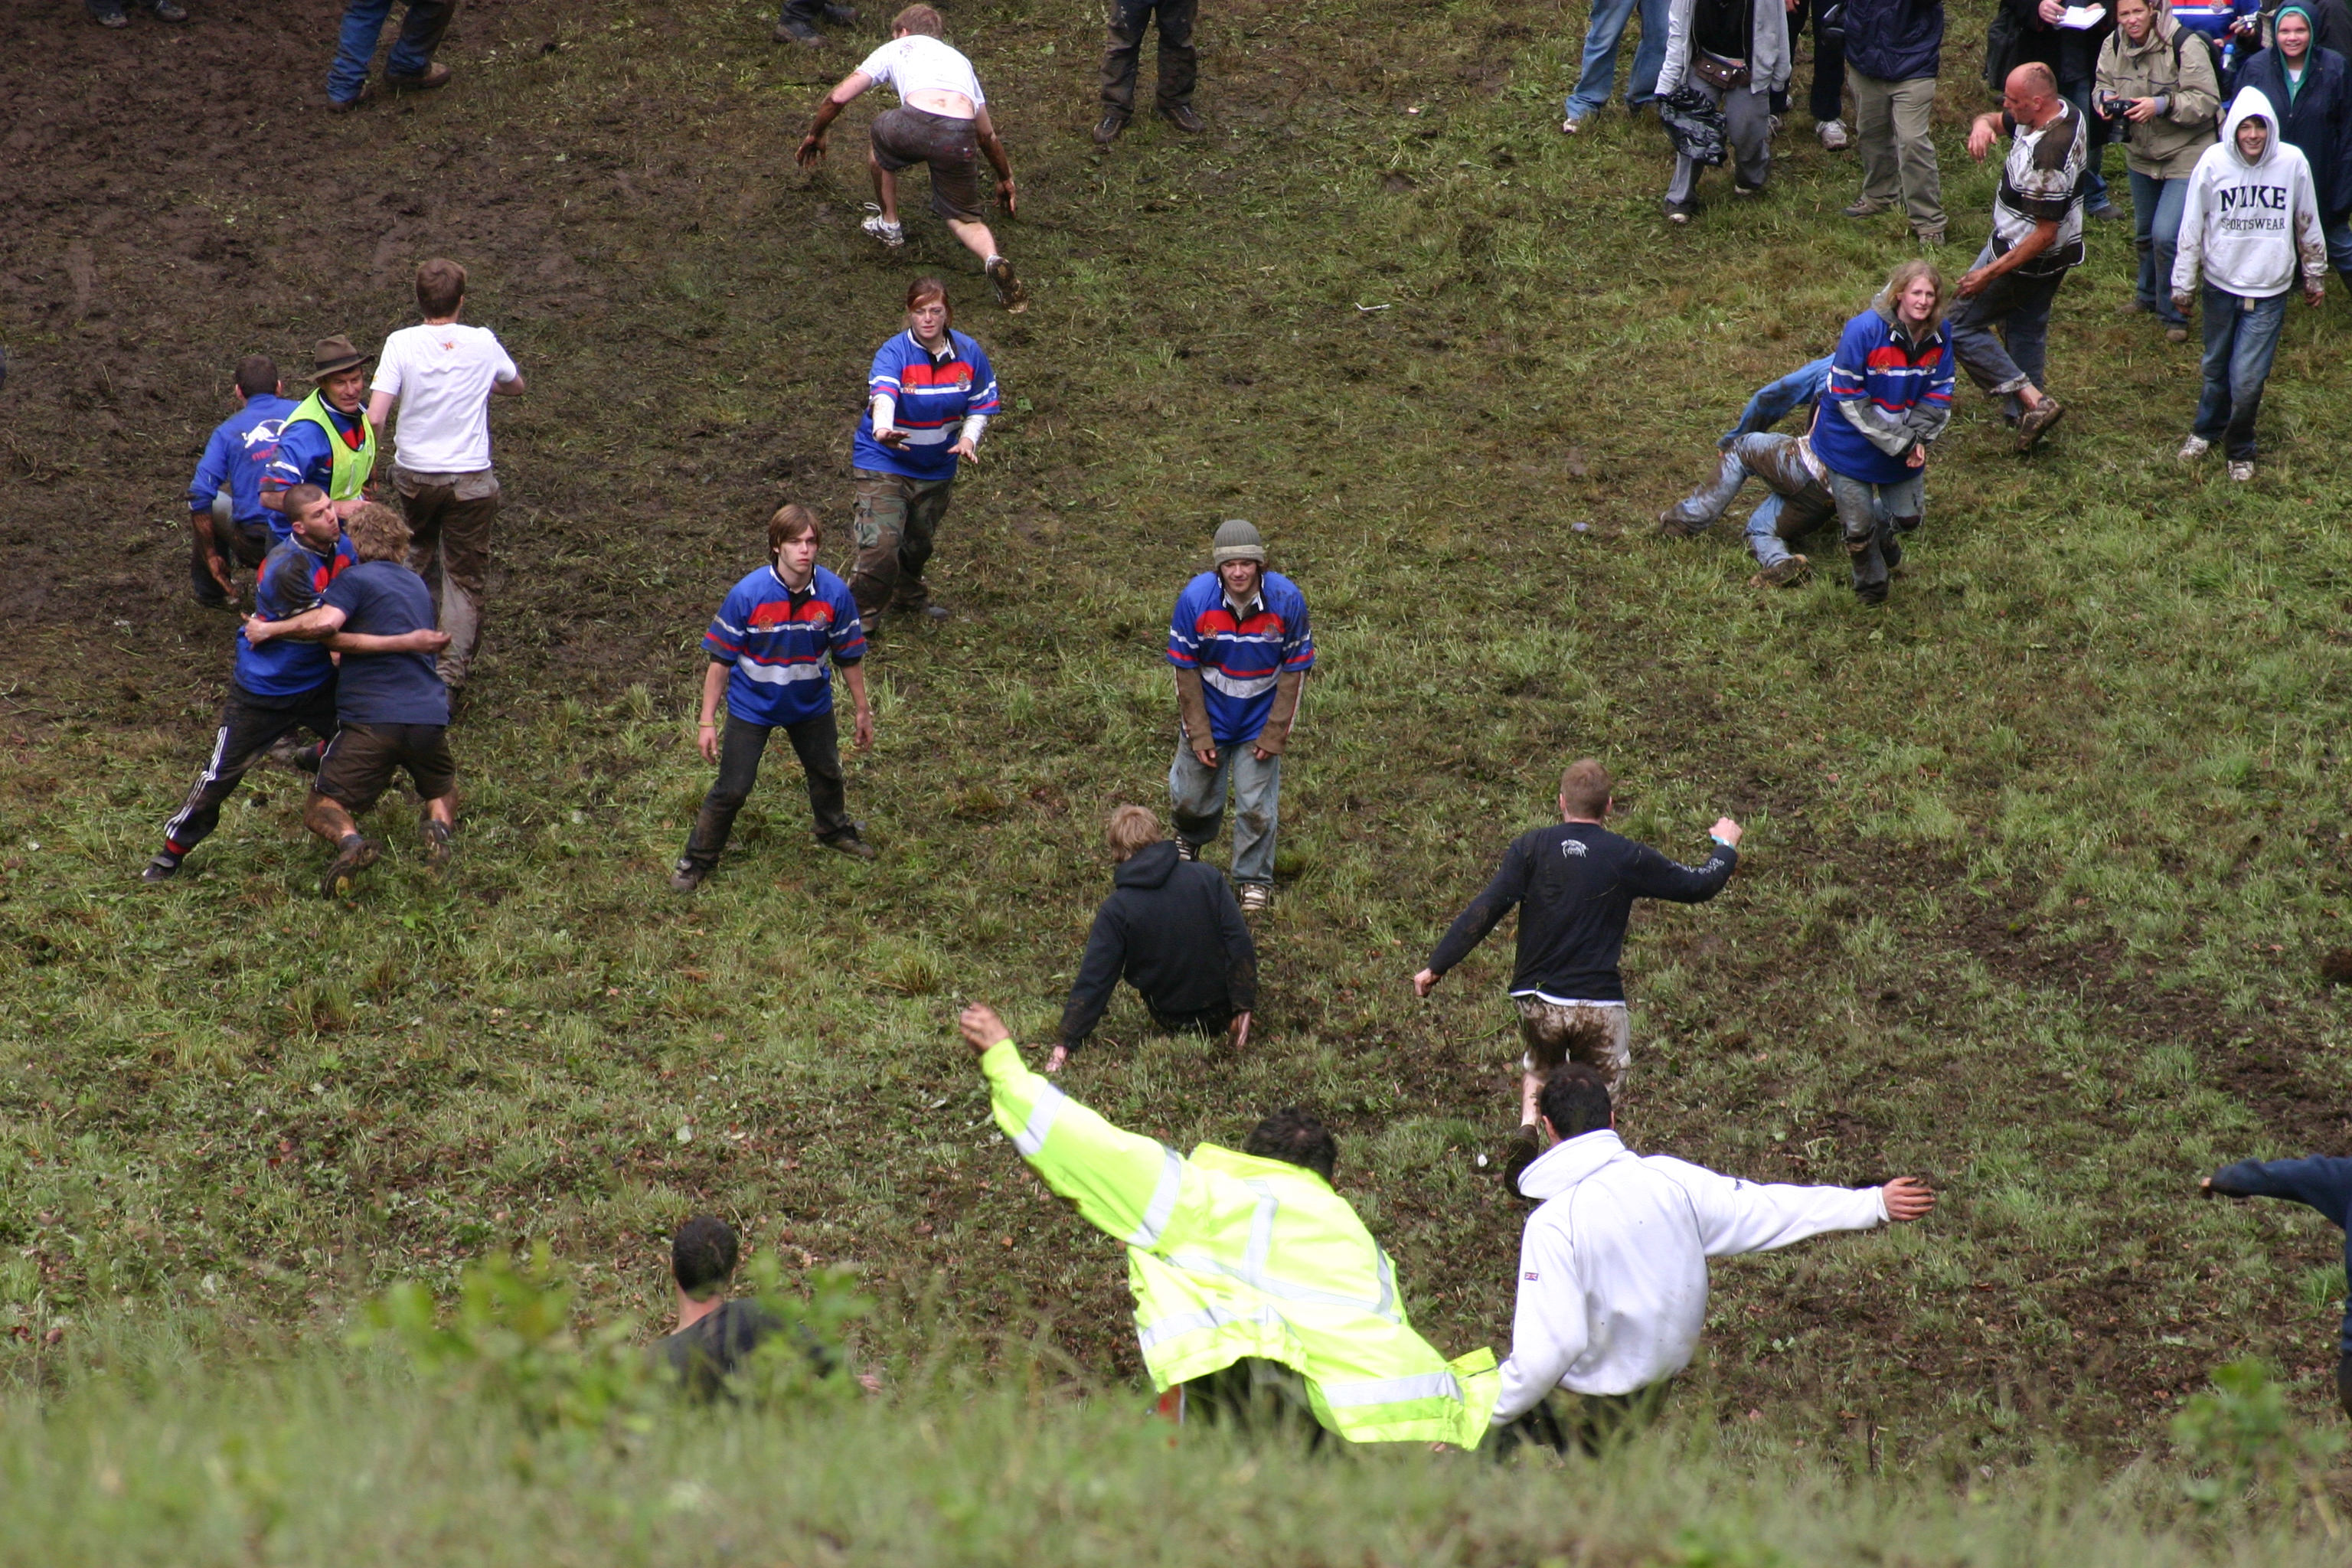 Sports you’ve never heard of: Cheese Rolling